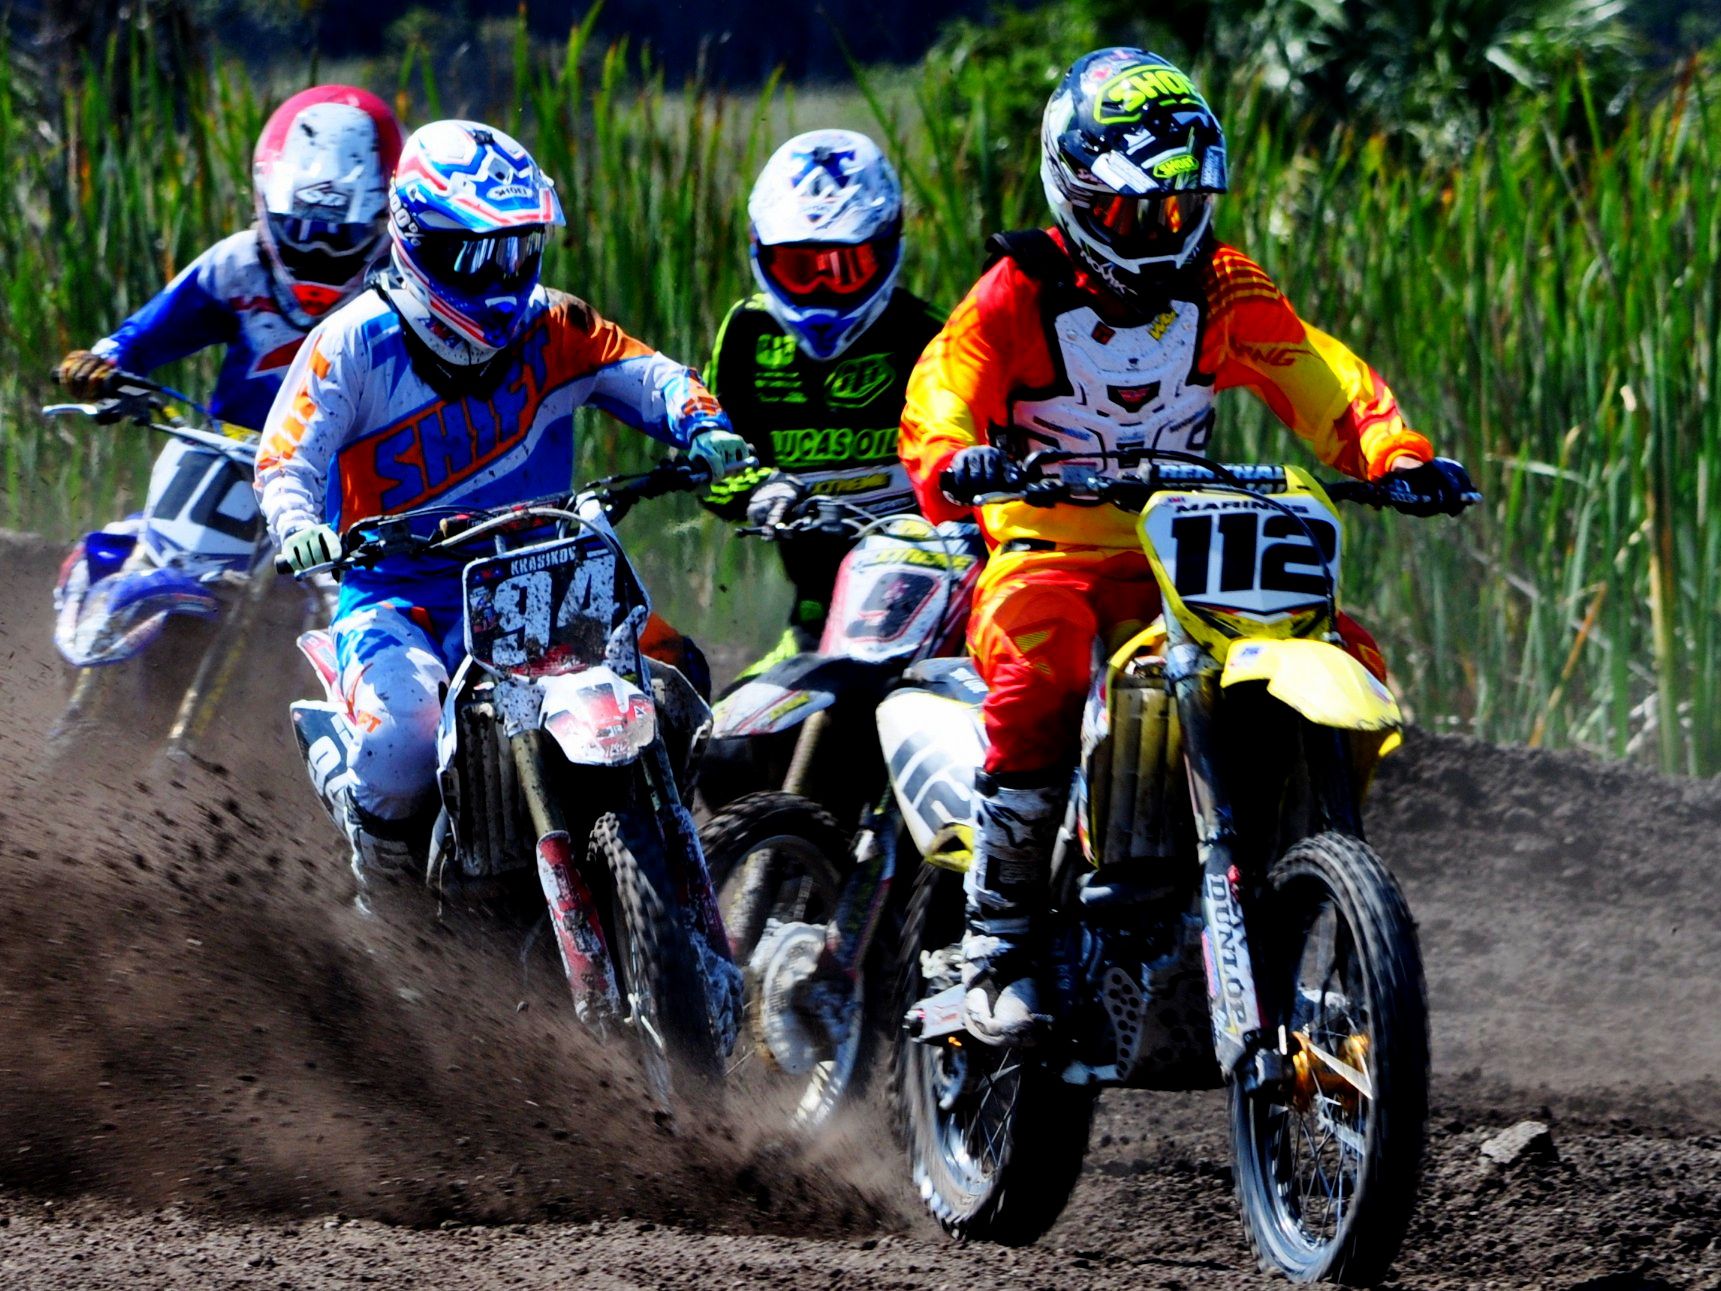 Four riders on motocross track wearing Shift and Lucas Oil riding gear.